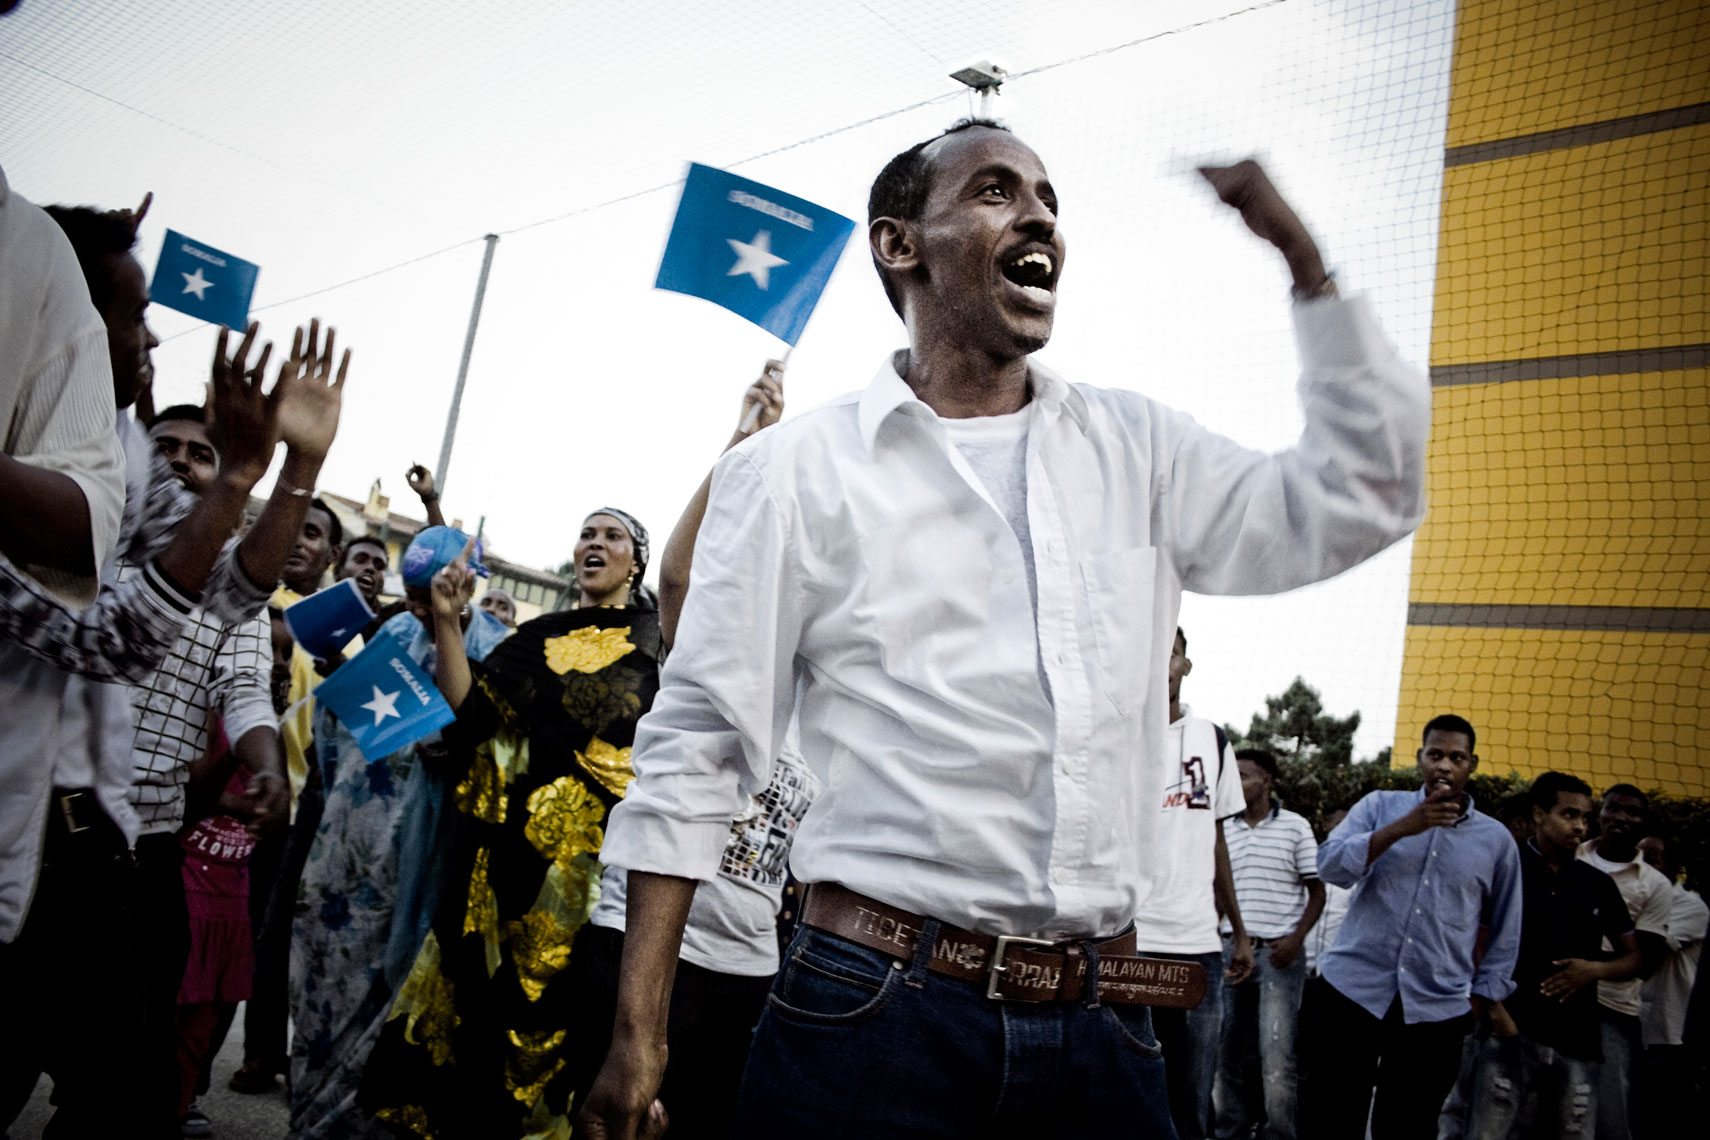 ITALY. Florence, 4th July 2010. Celebrations for the 50th anniversary of the Somalia Independence Day (1st July 1960).